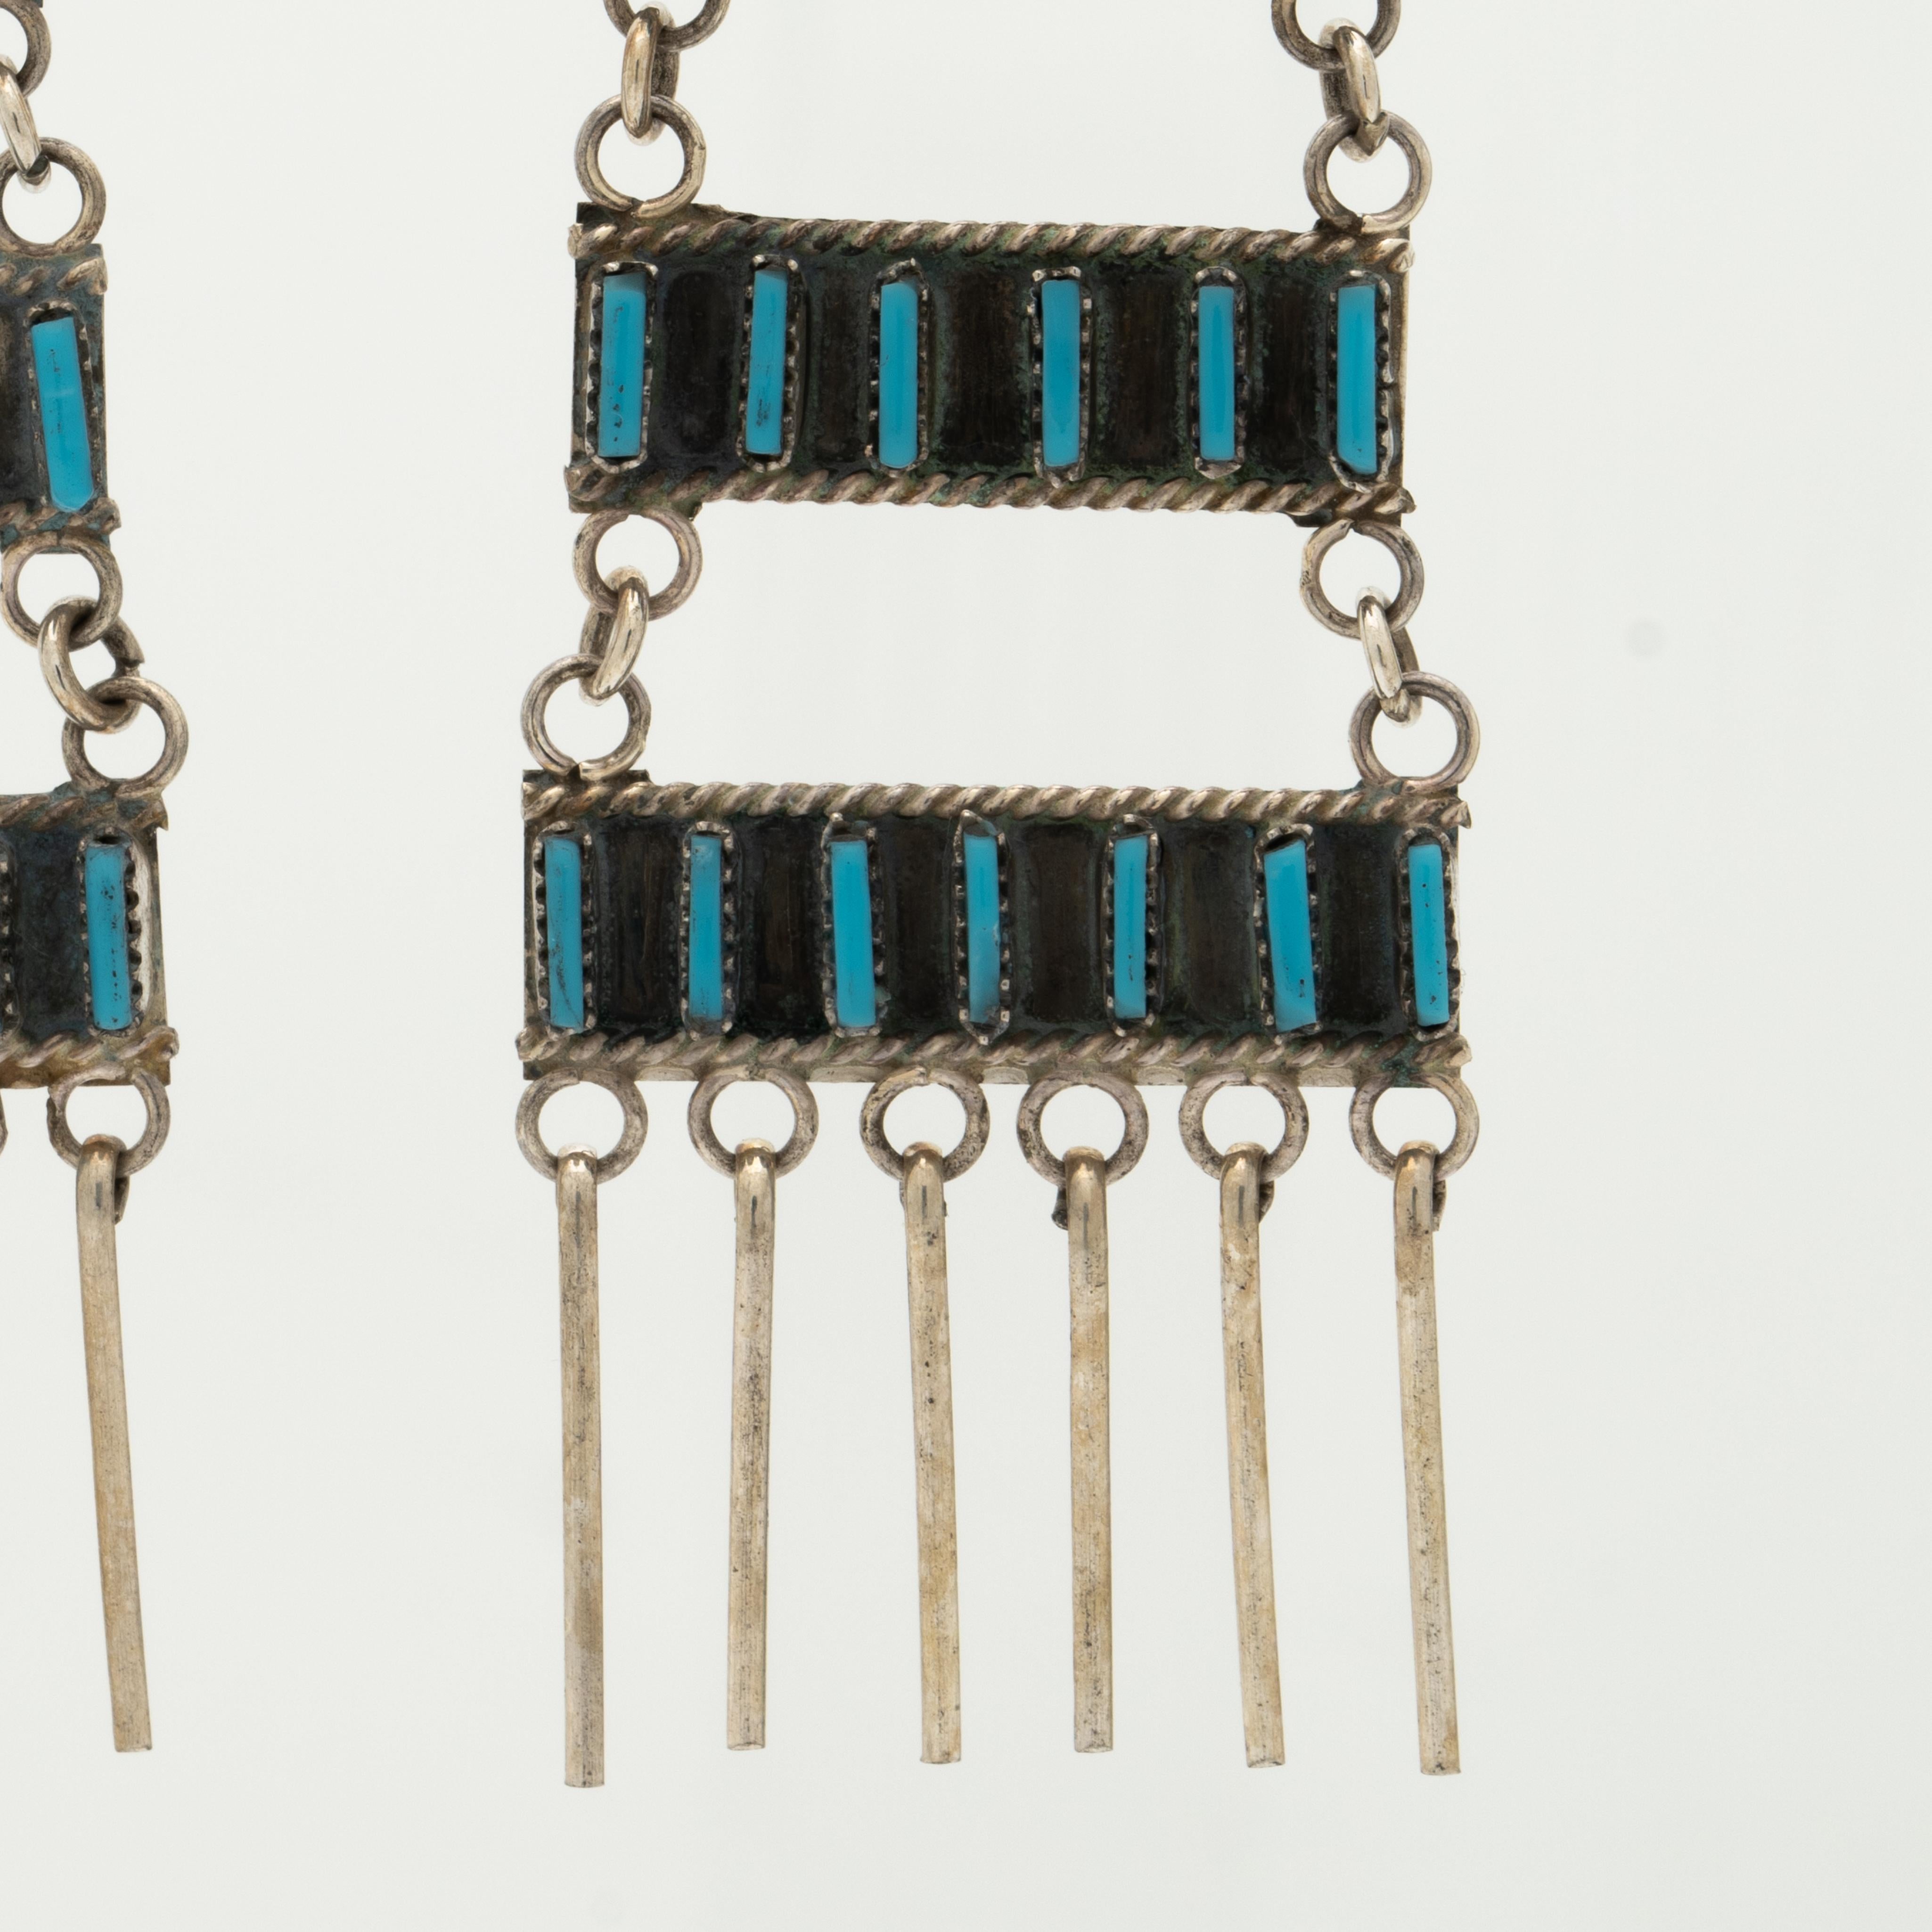 Native American Vintage Zuni Silver Turquoise Long Fringe Earrings, C. 1970s In Excellent Condition For Sale In New York, NY